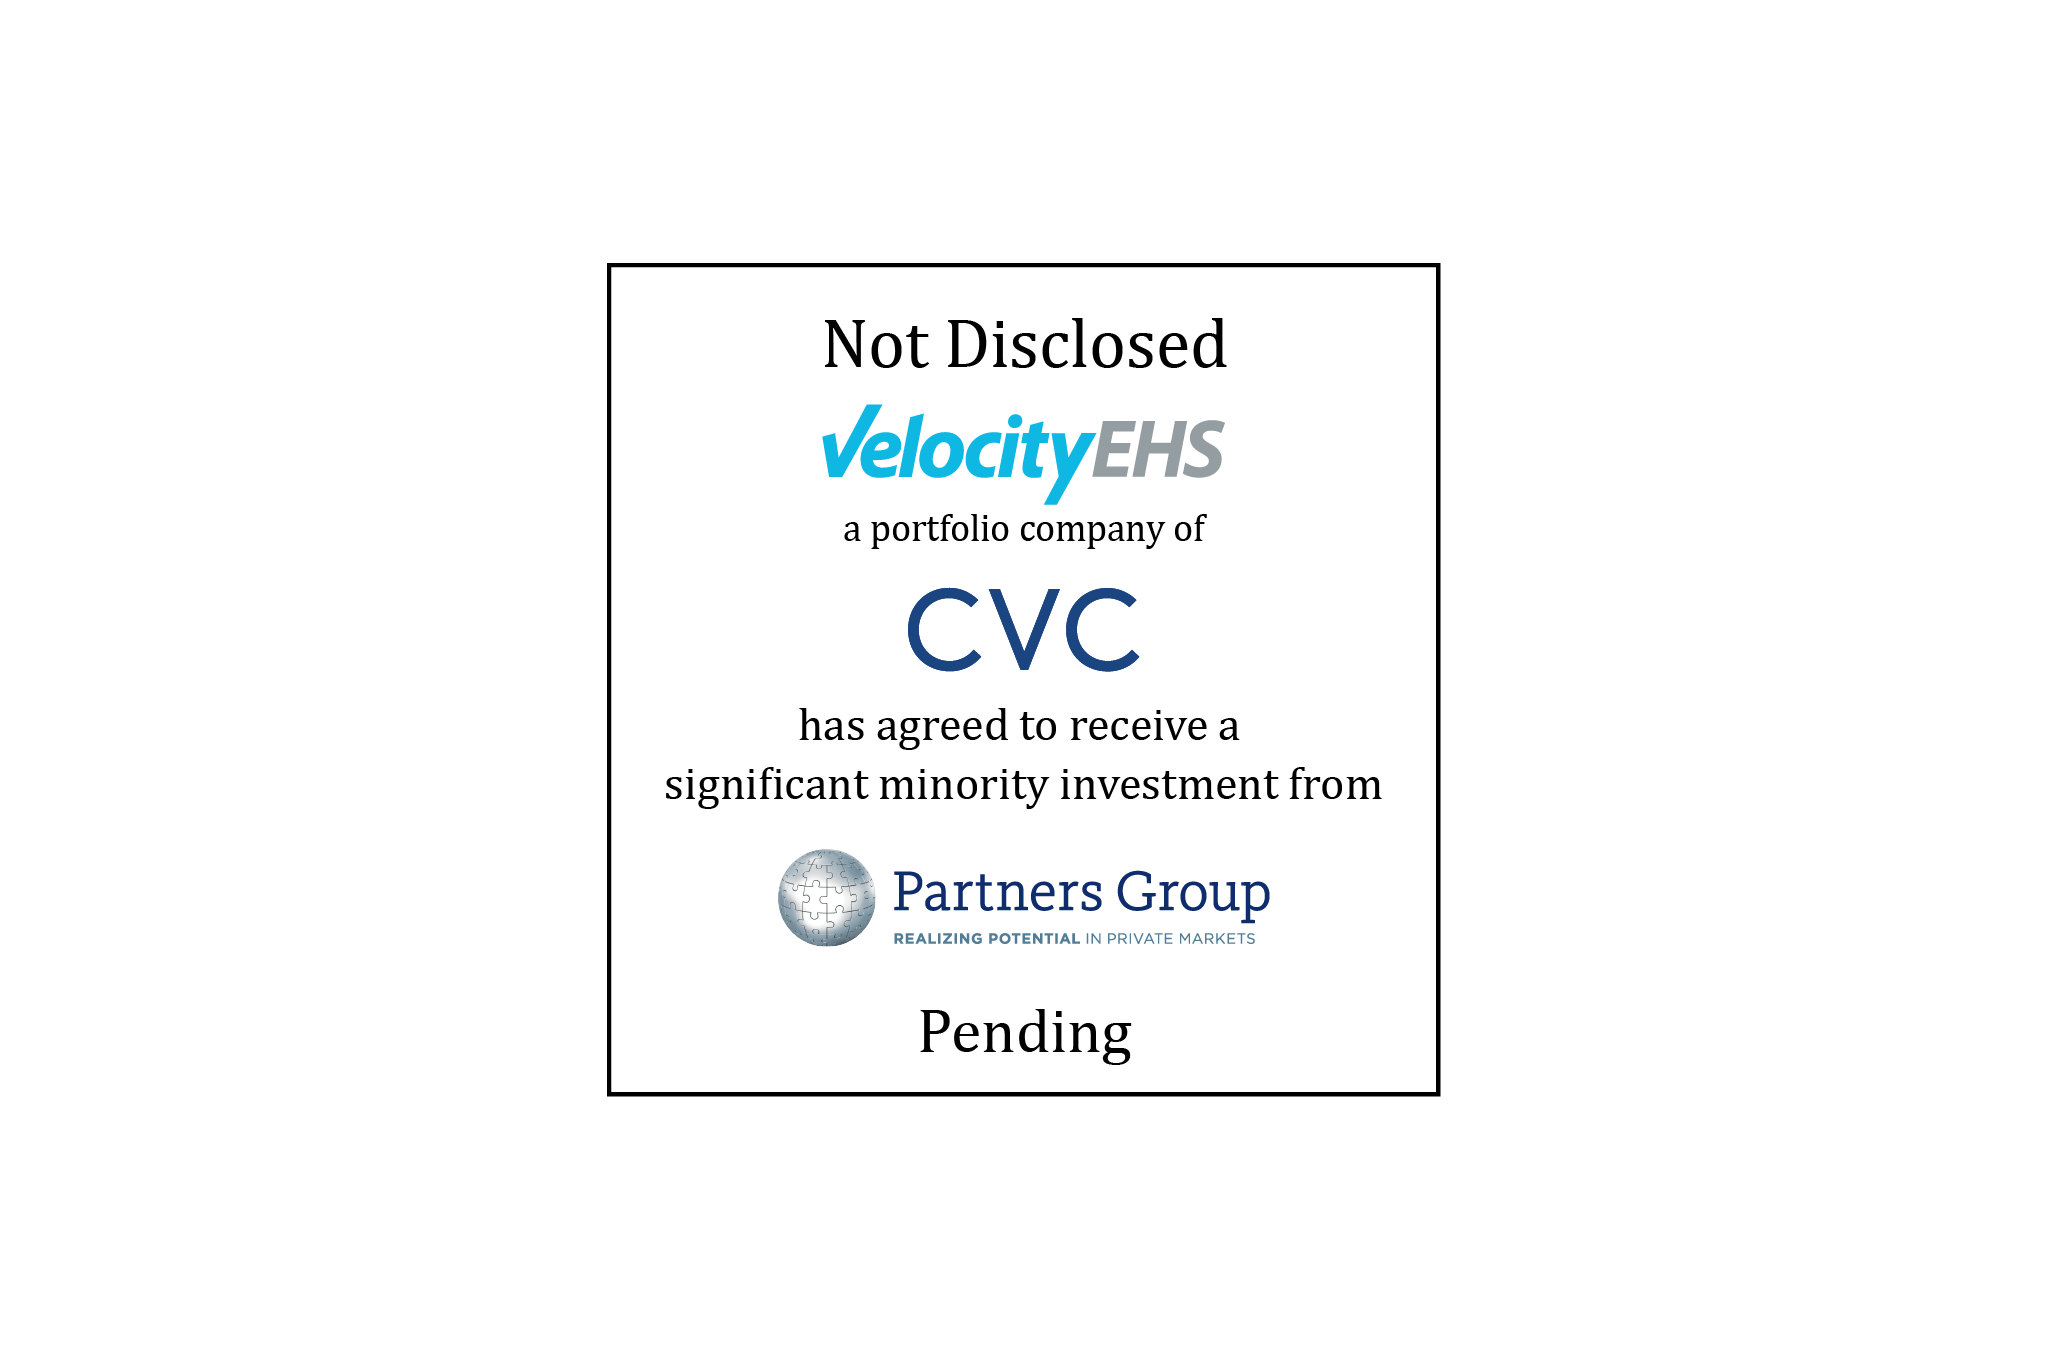 Not Disclosed | VelocityEHS (logo), a portfolio company of CVC, has Agreed to Receive a Significant Minority Investment From Partners Group (logo) | Pending